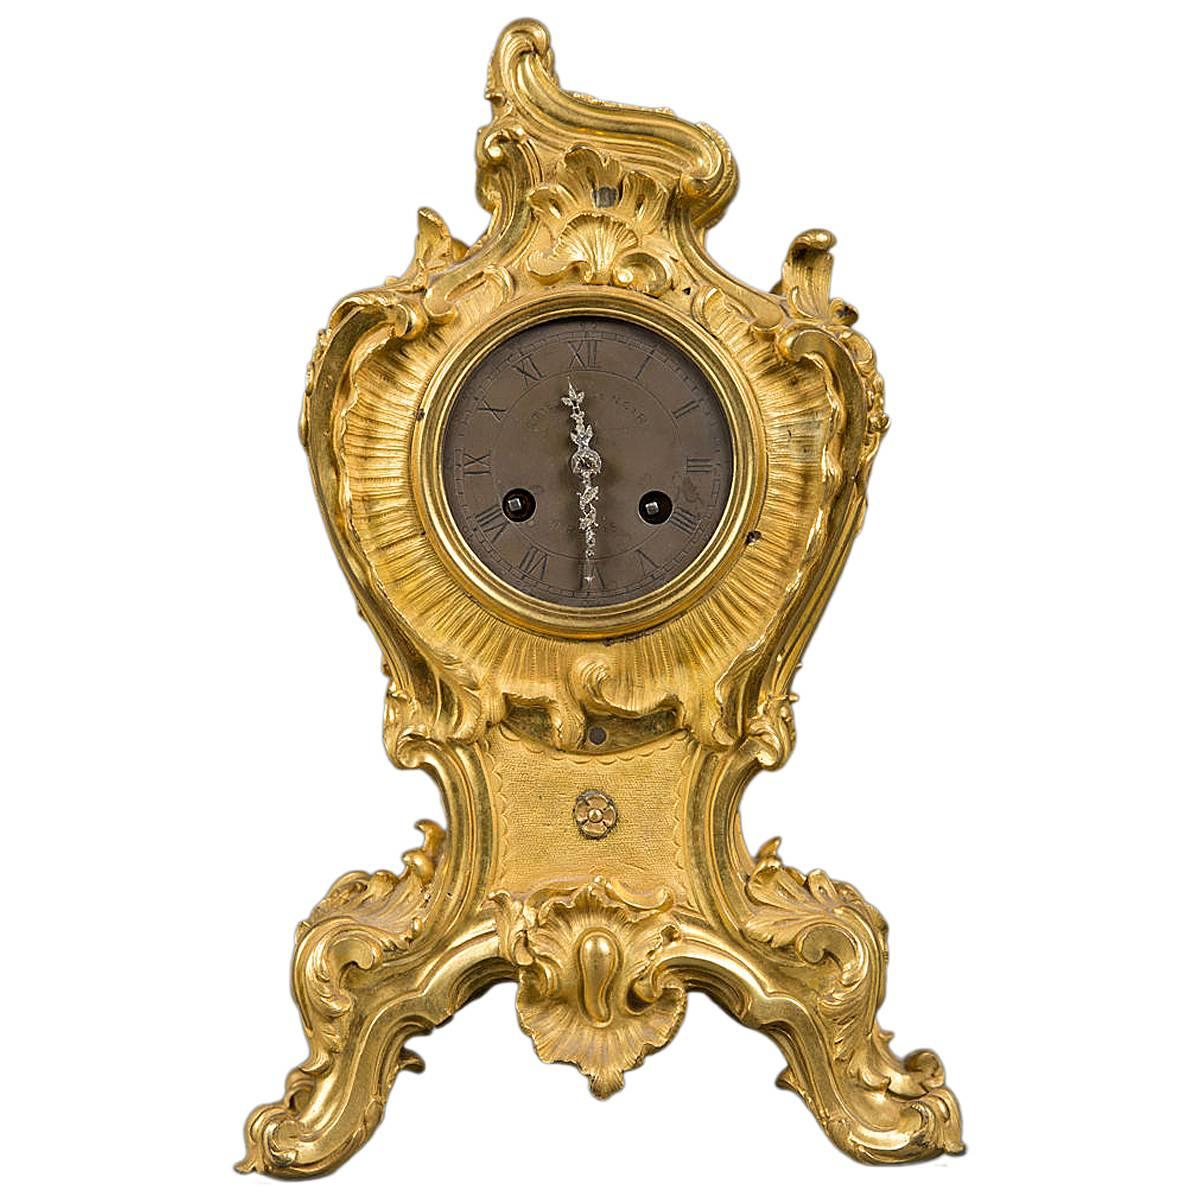 18th century French Mantel Clock by Le Noir